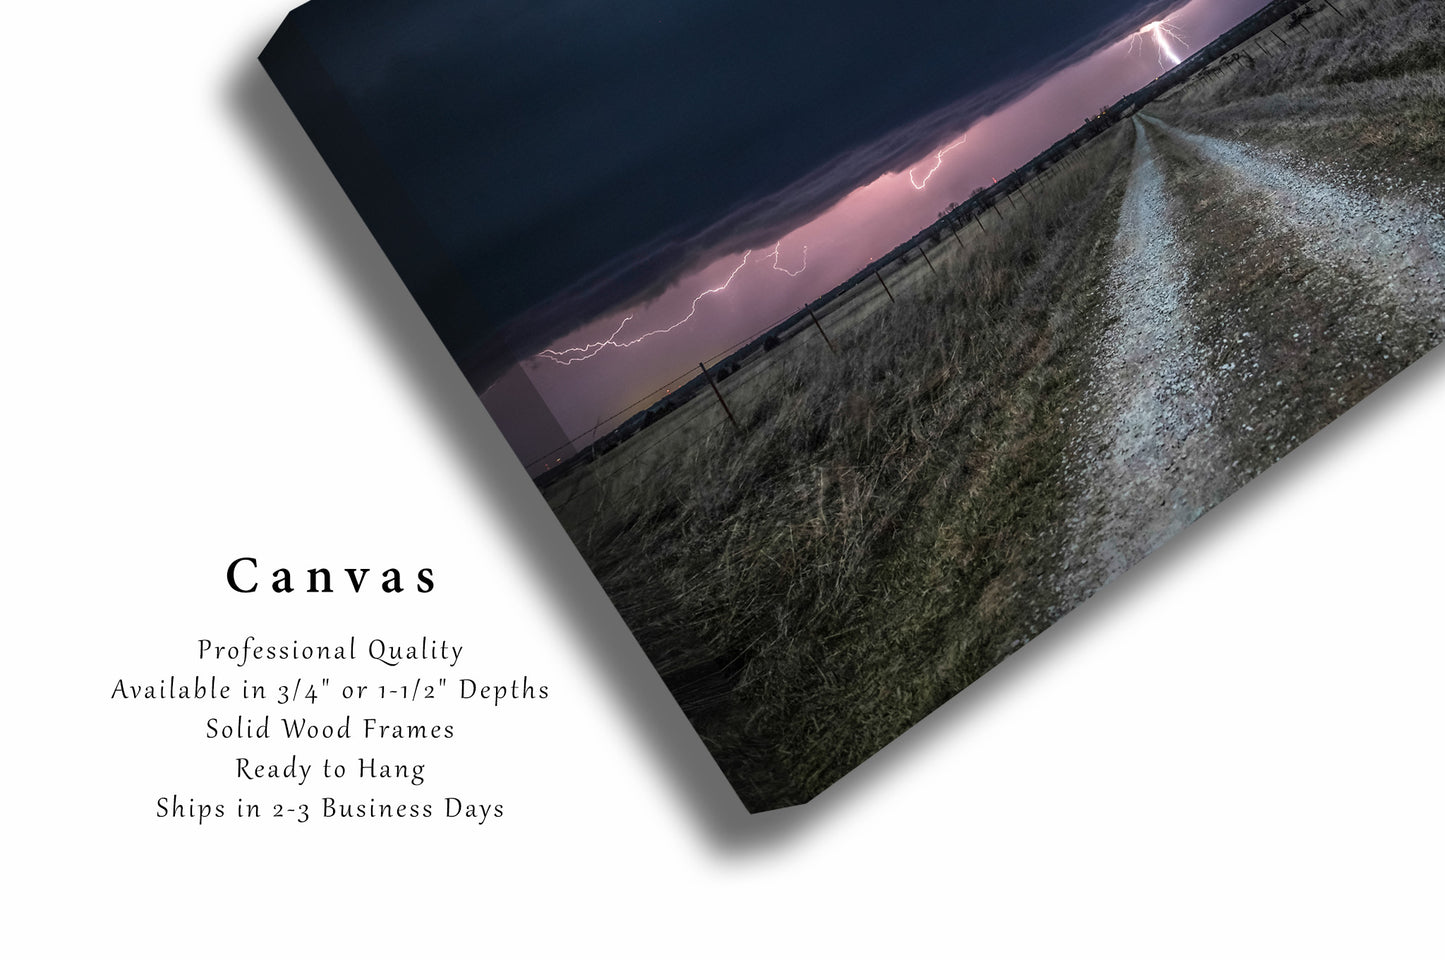 Canvas Wall Art | Lightning Down Country Road Picture | Thunderstorm Gallery Wrap | Kansas Photography | Moody Nature Decor